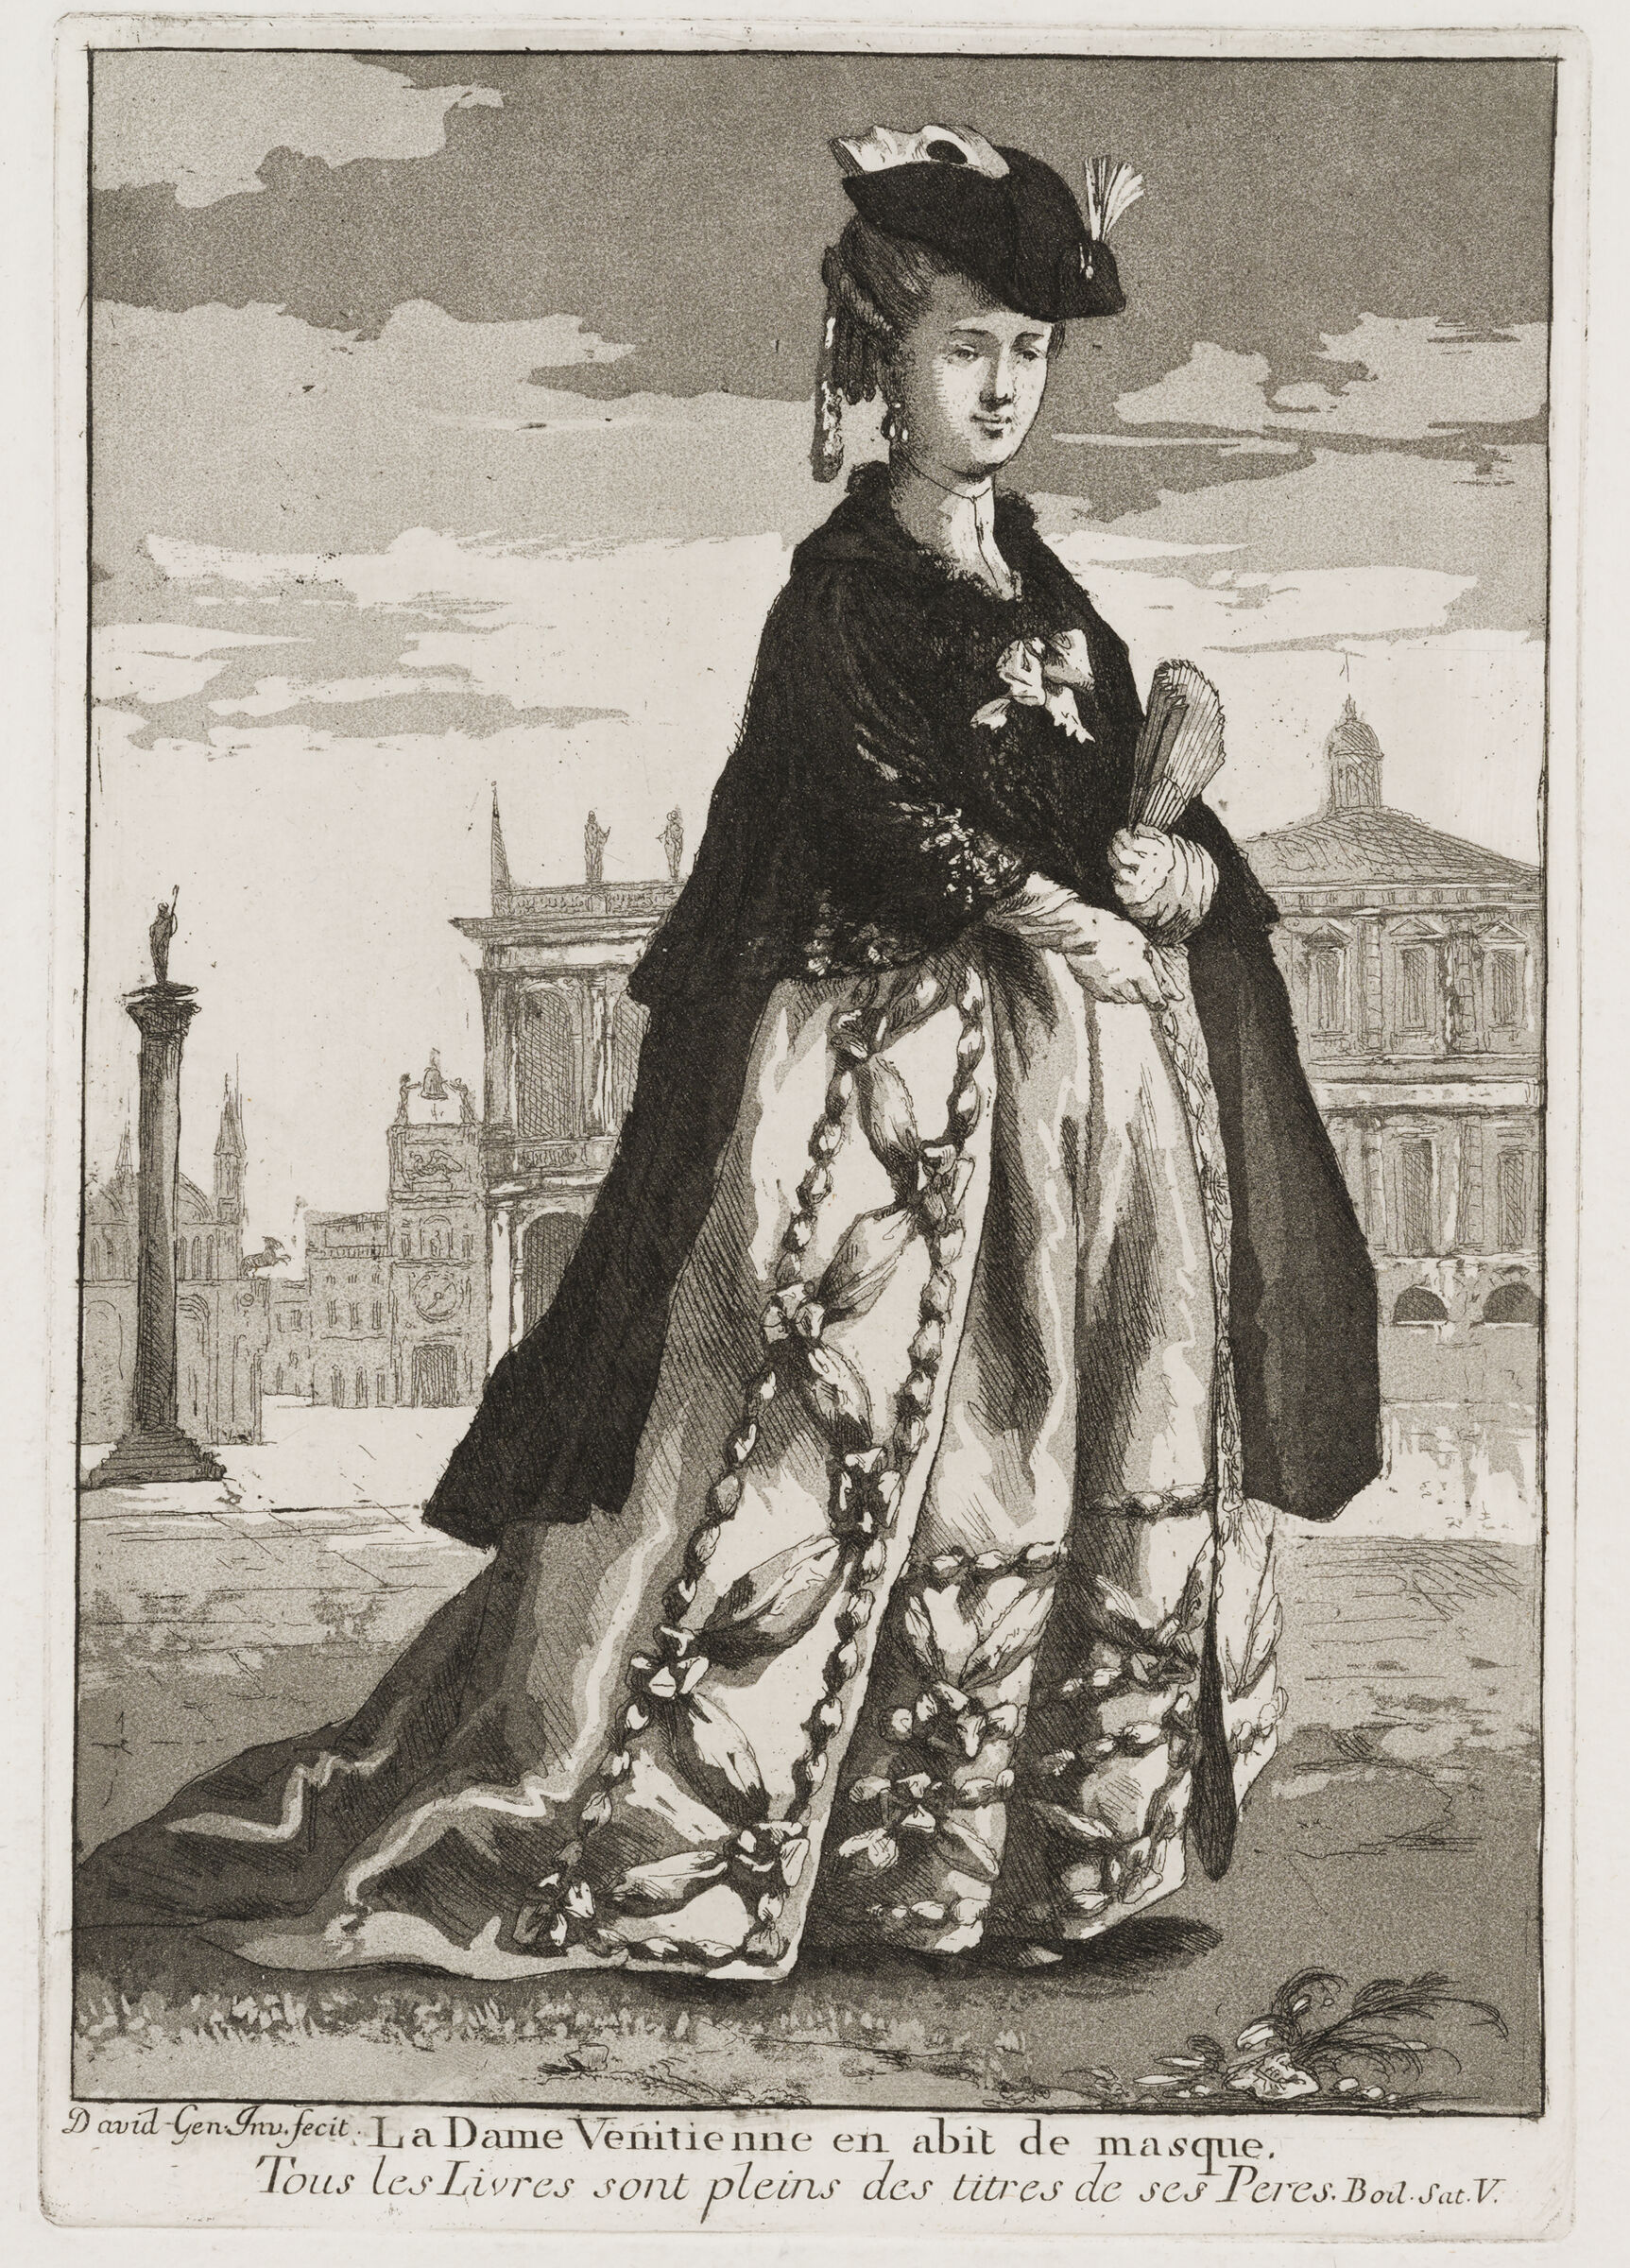 The Venetian Lady In Masquerade Dress